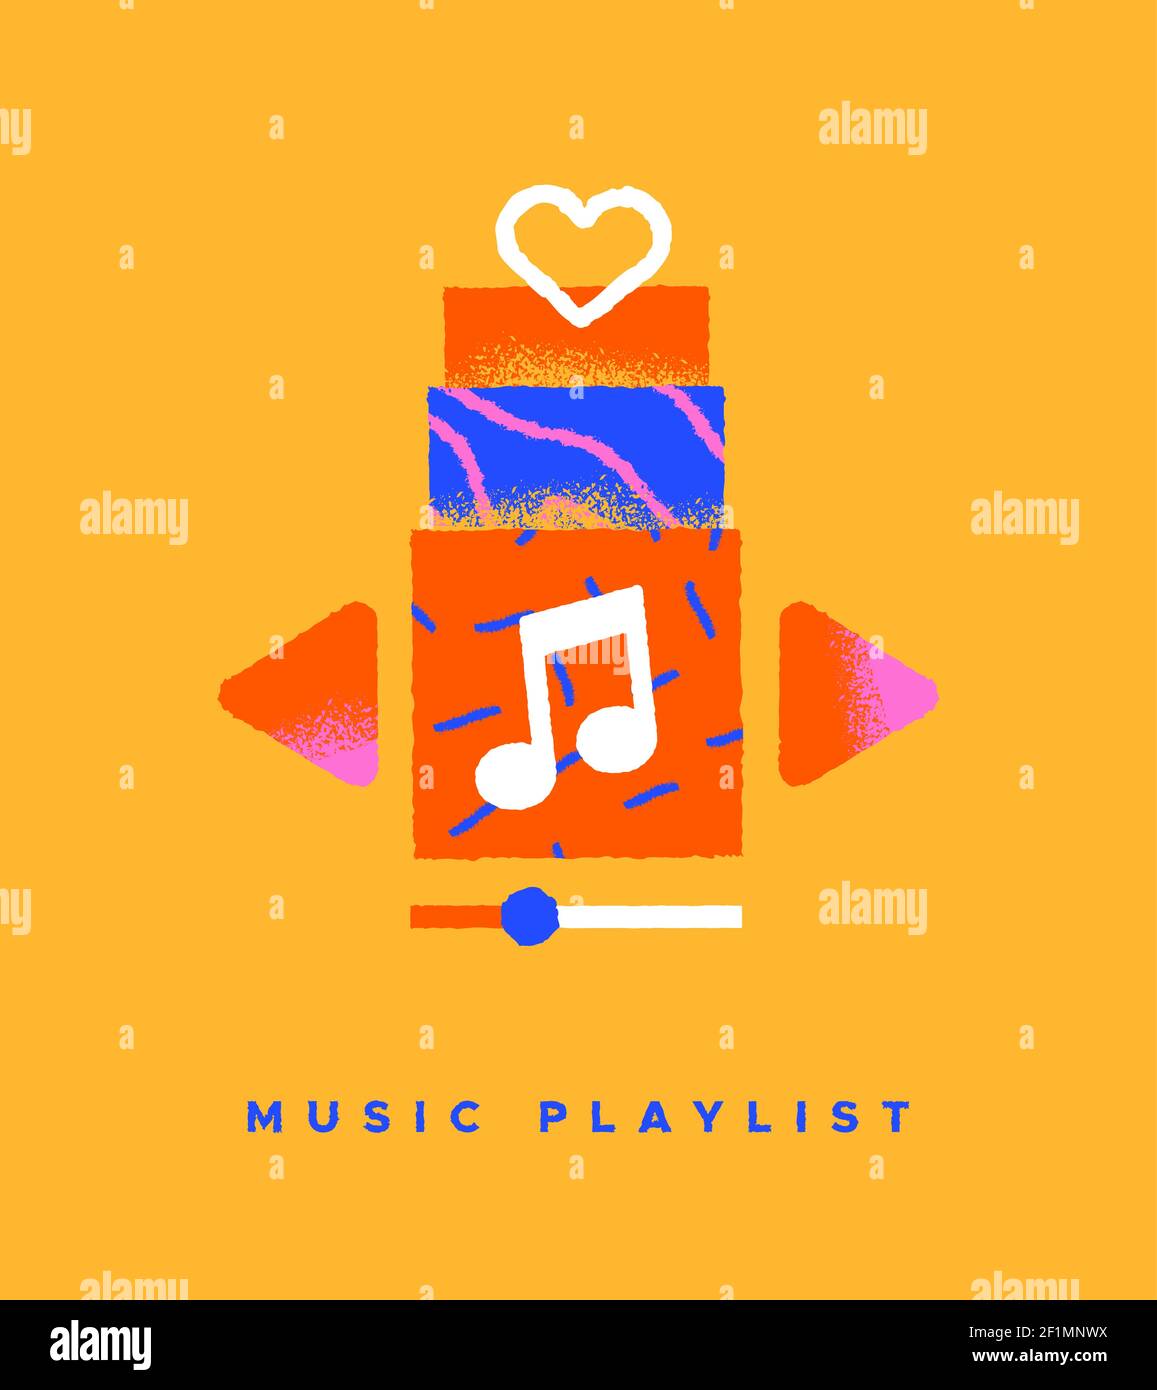 Music playlist colorful flat icon illustration on isolated background. Song streaming app or musical player interface concept in trendy hand drawn car Stock Vector